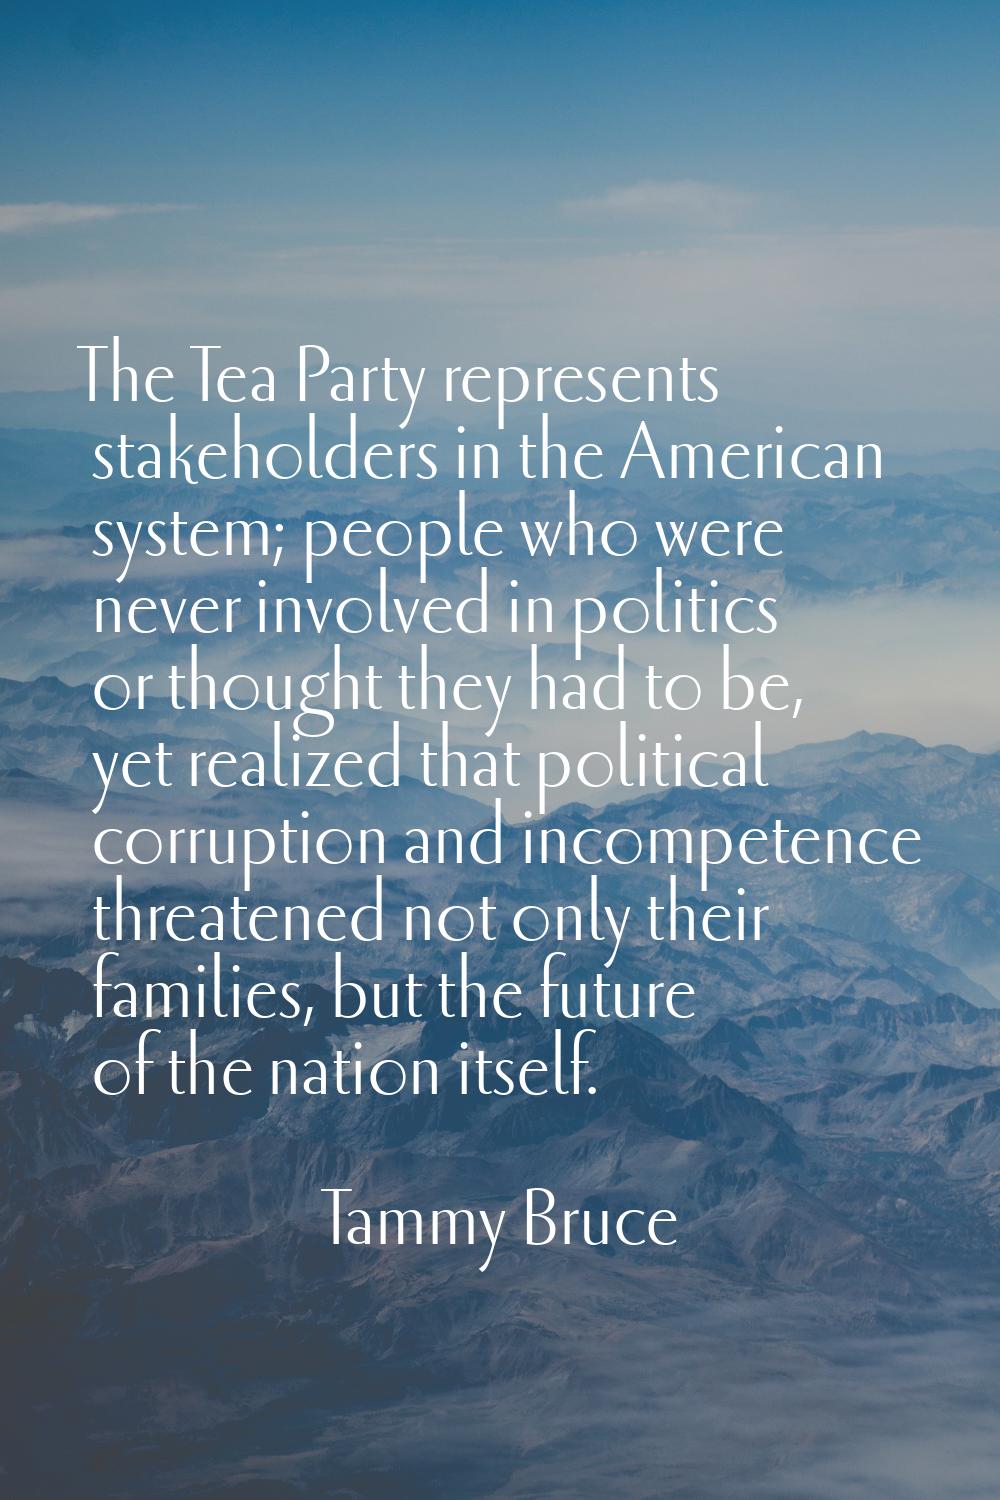 The Tea Party represents stakeholders in the American system; people who were never involved in pol